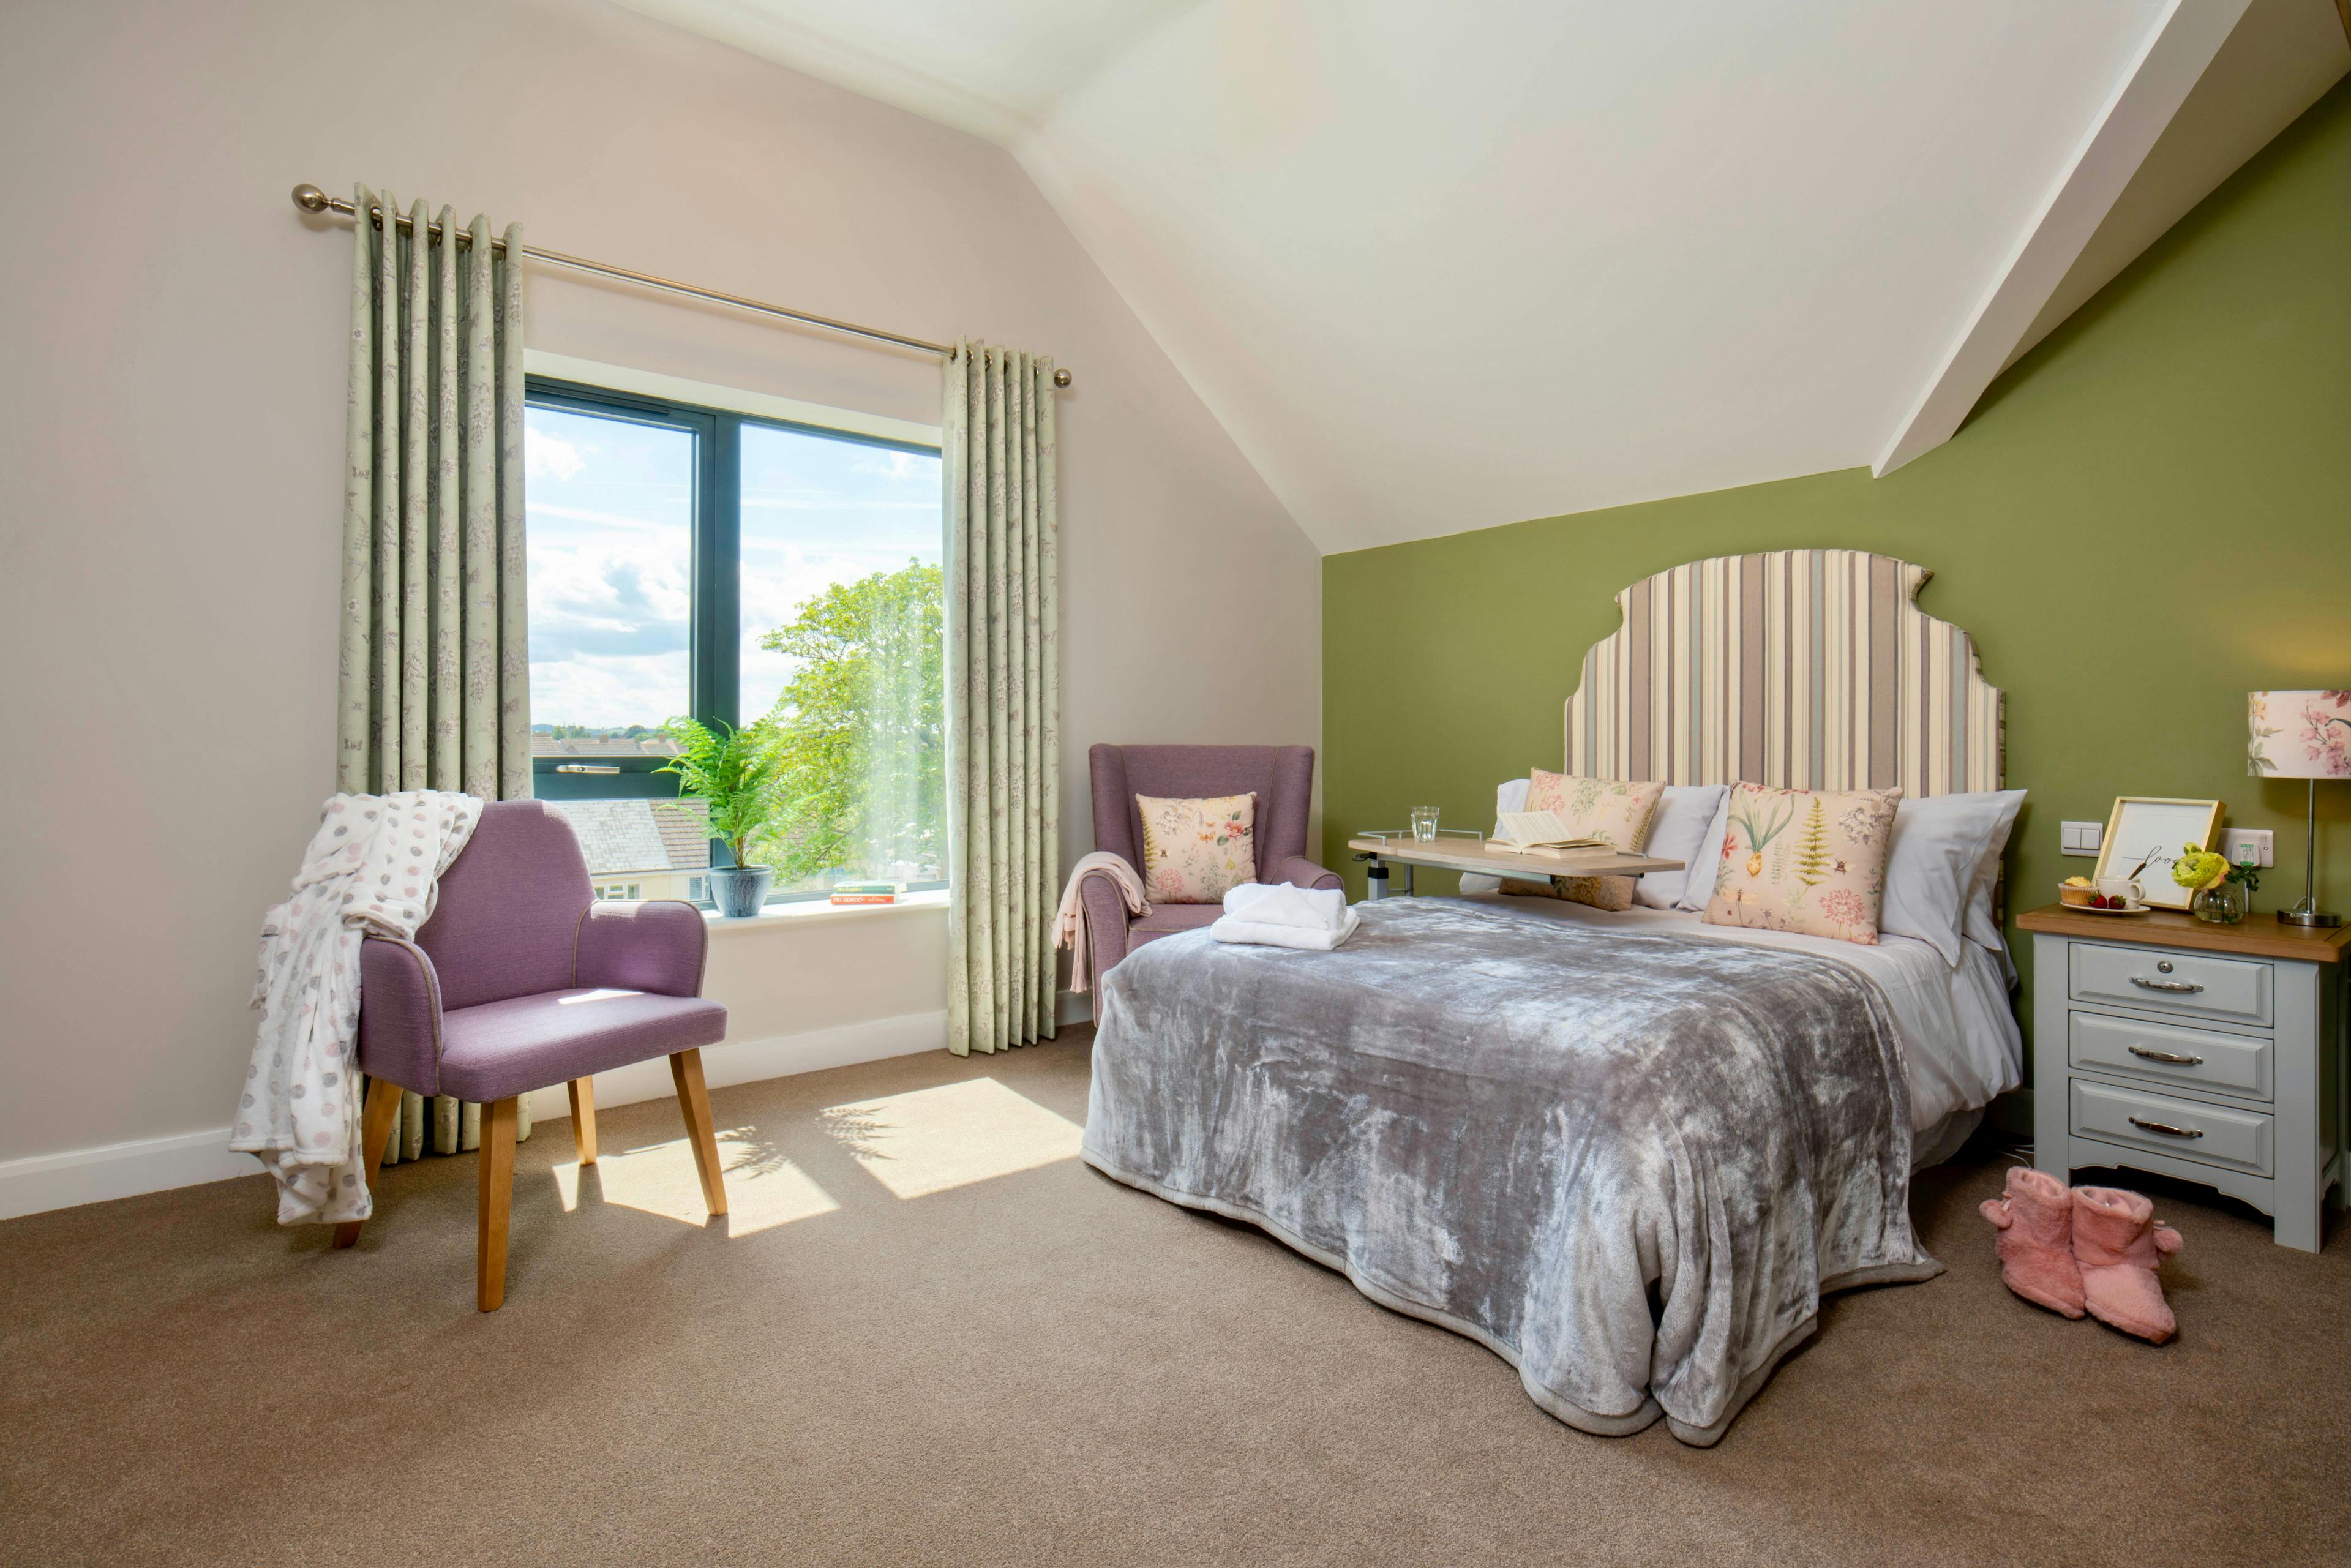 Bedroom of Richard House care home in Grantham, Lincolnshire